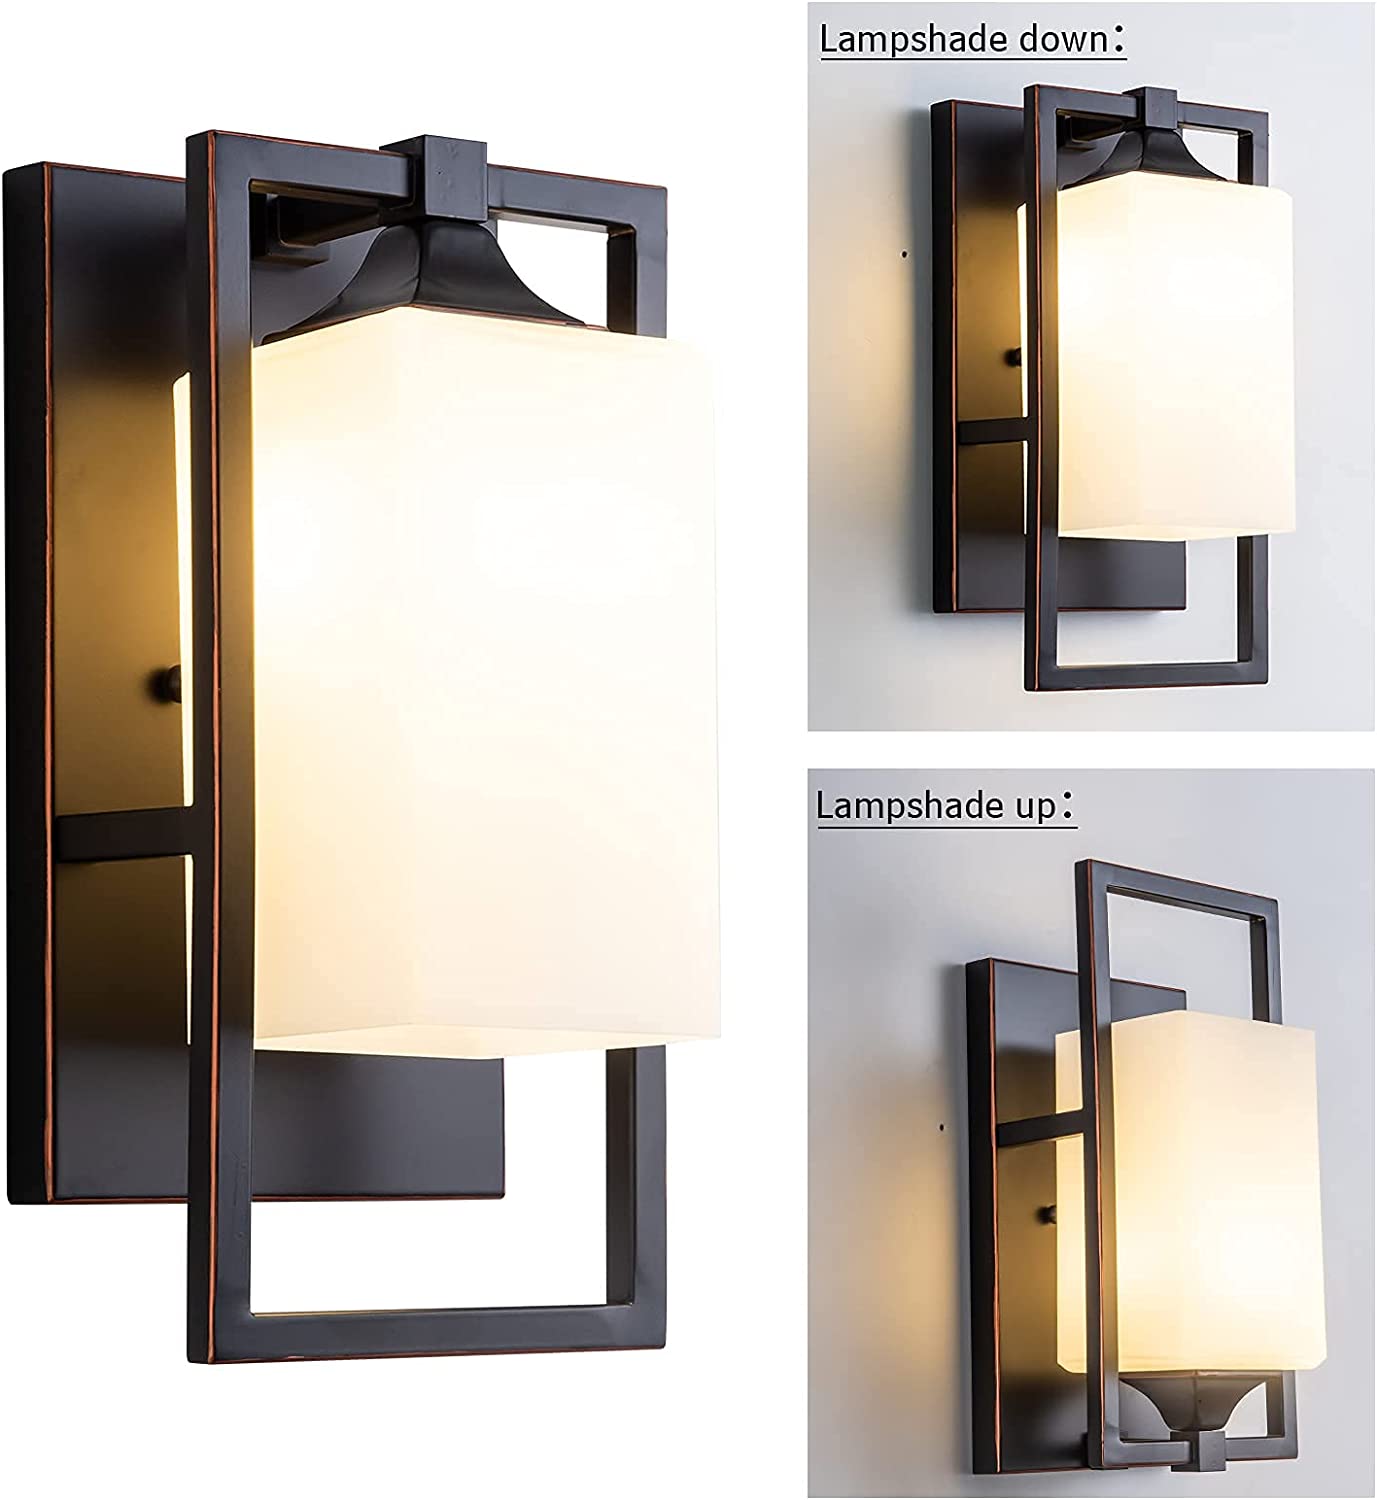 Vintage wall sconce with bronze finish glass vanity wall light fixture